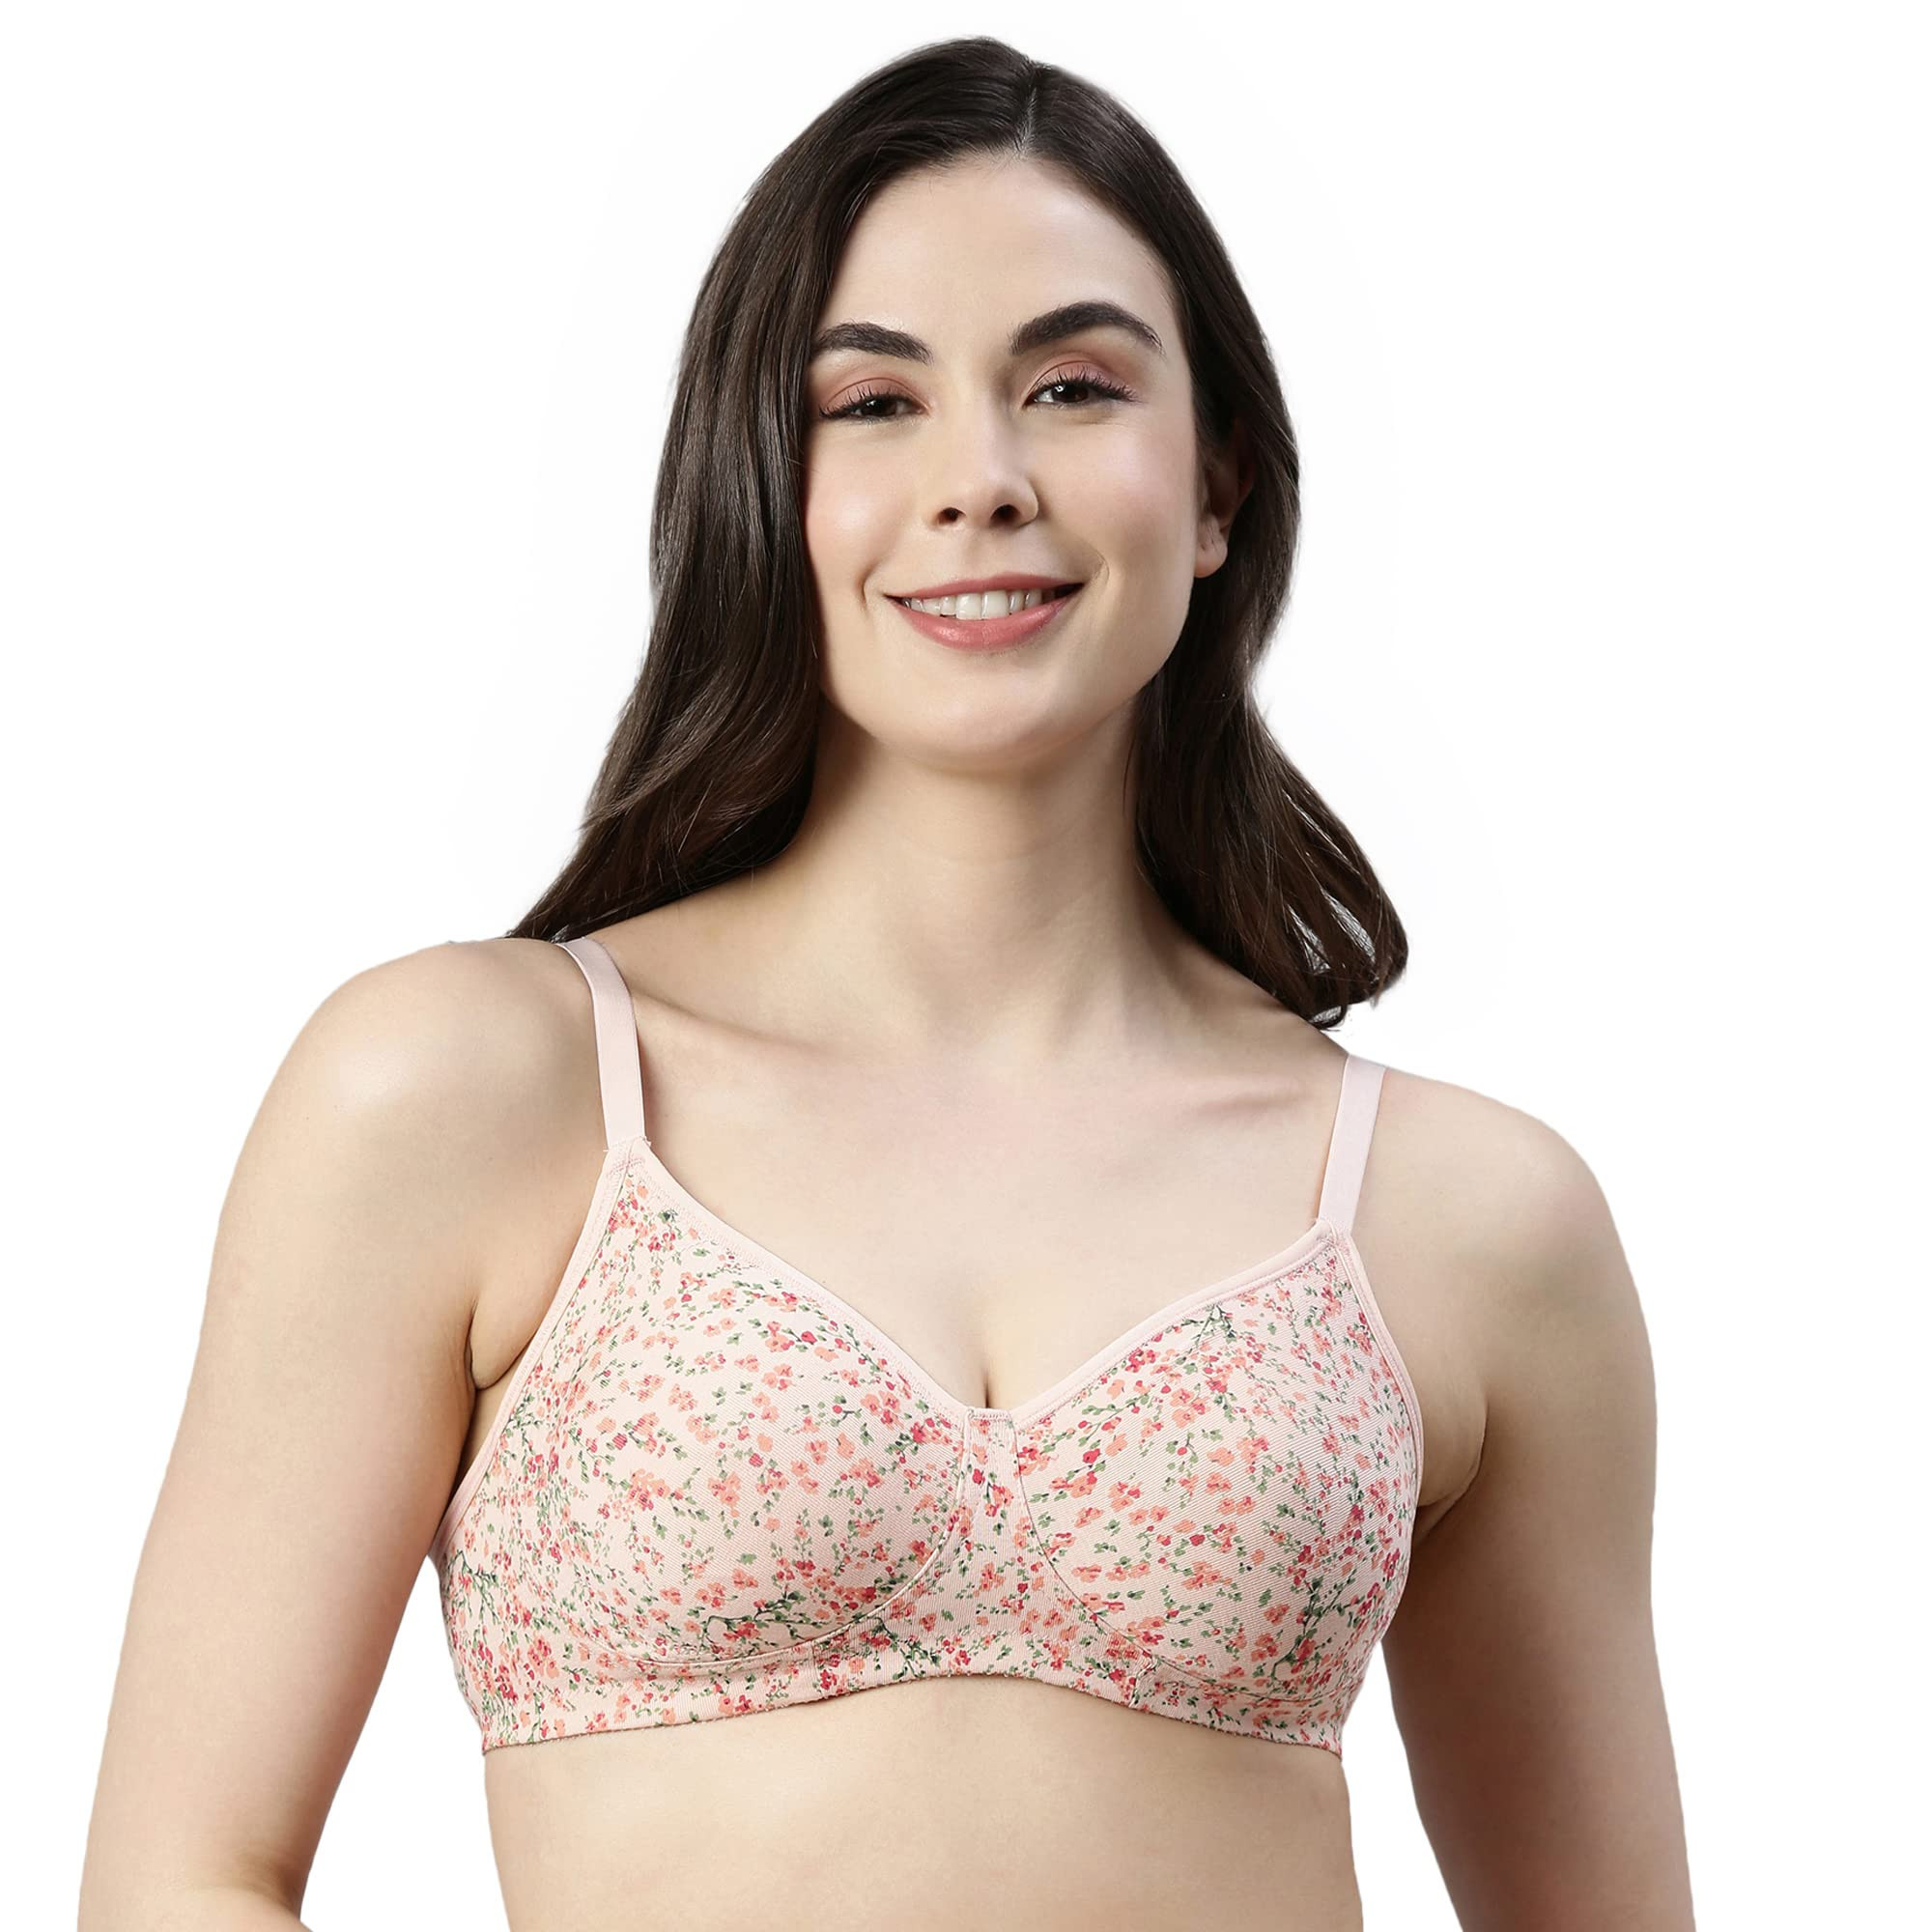 https://www.zebrs.com/uploads/zebrs/products/enamor-a042-everyday-cotton-classic-bra-for-women---side-support-shaper-non-padded-non-wired-amp-high-coverage-with-cooling-fabrica042-revello-print-34csize-40c-73967547118266_l.jpg